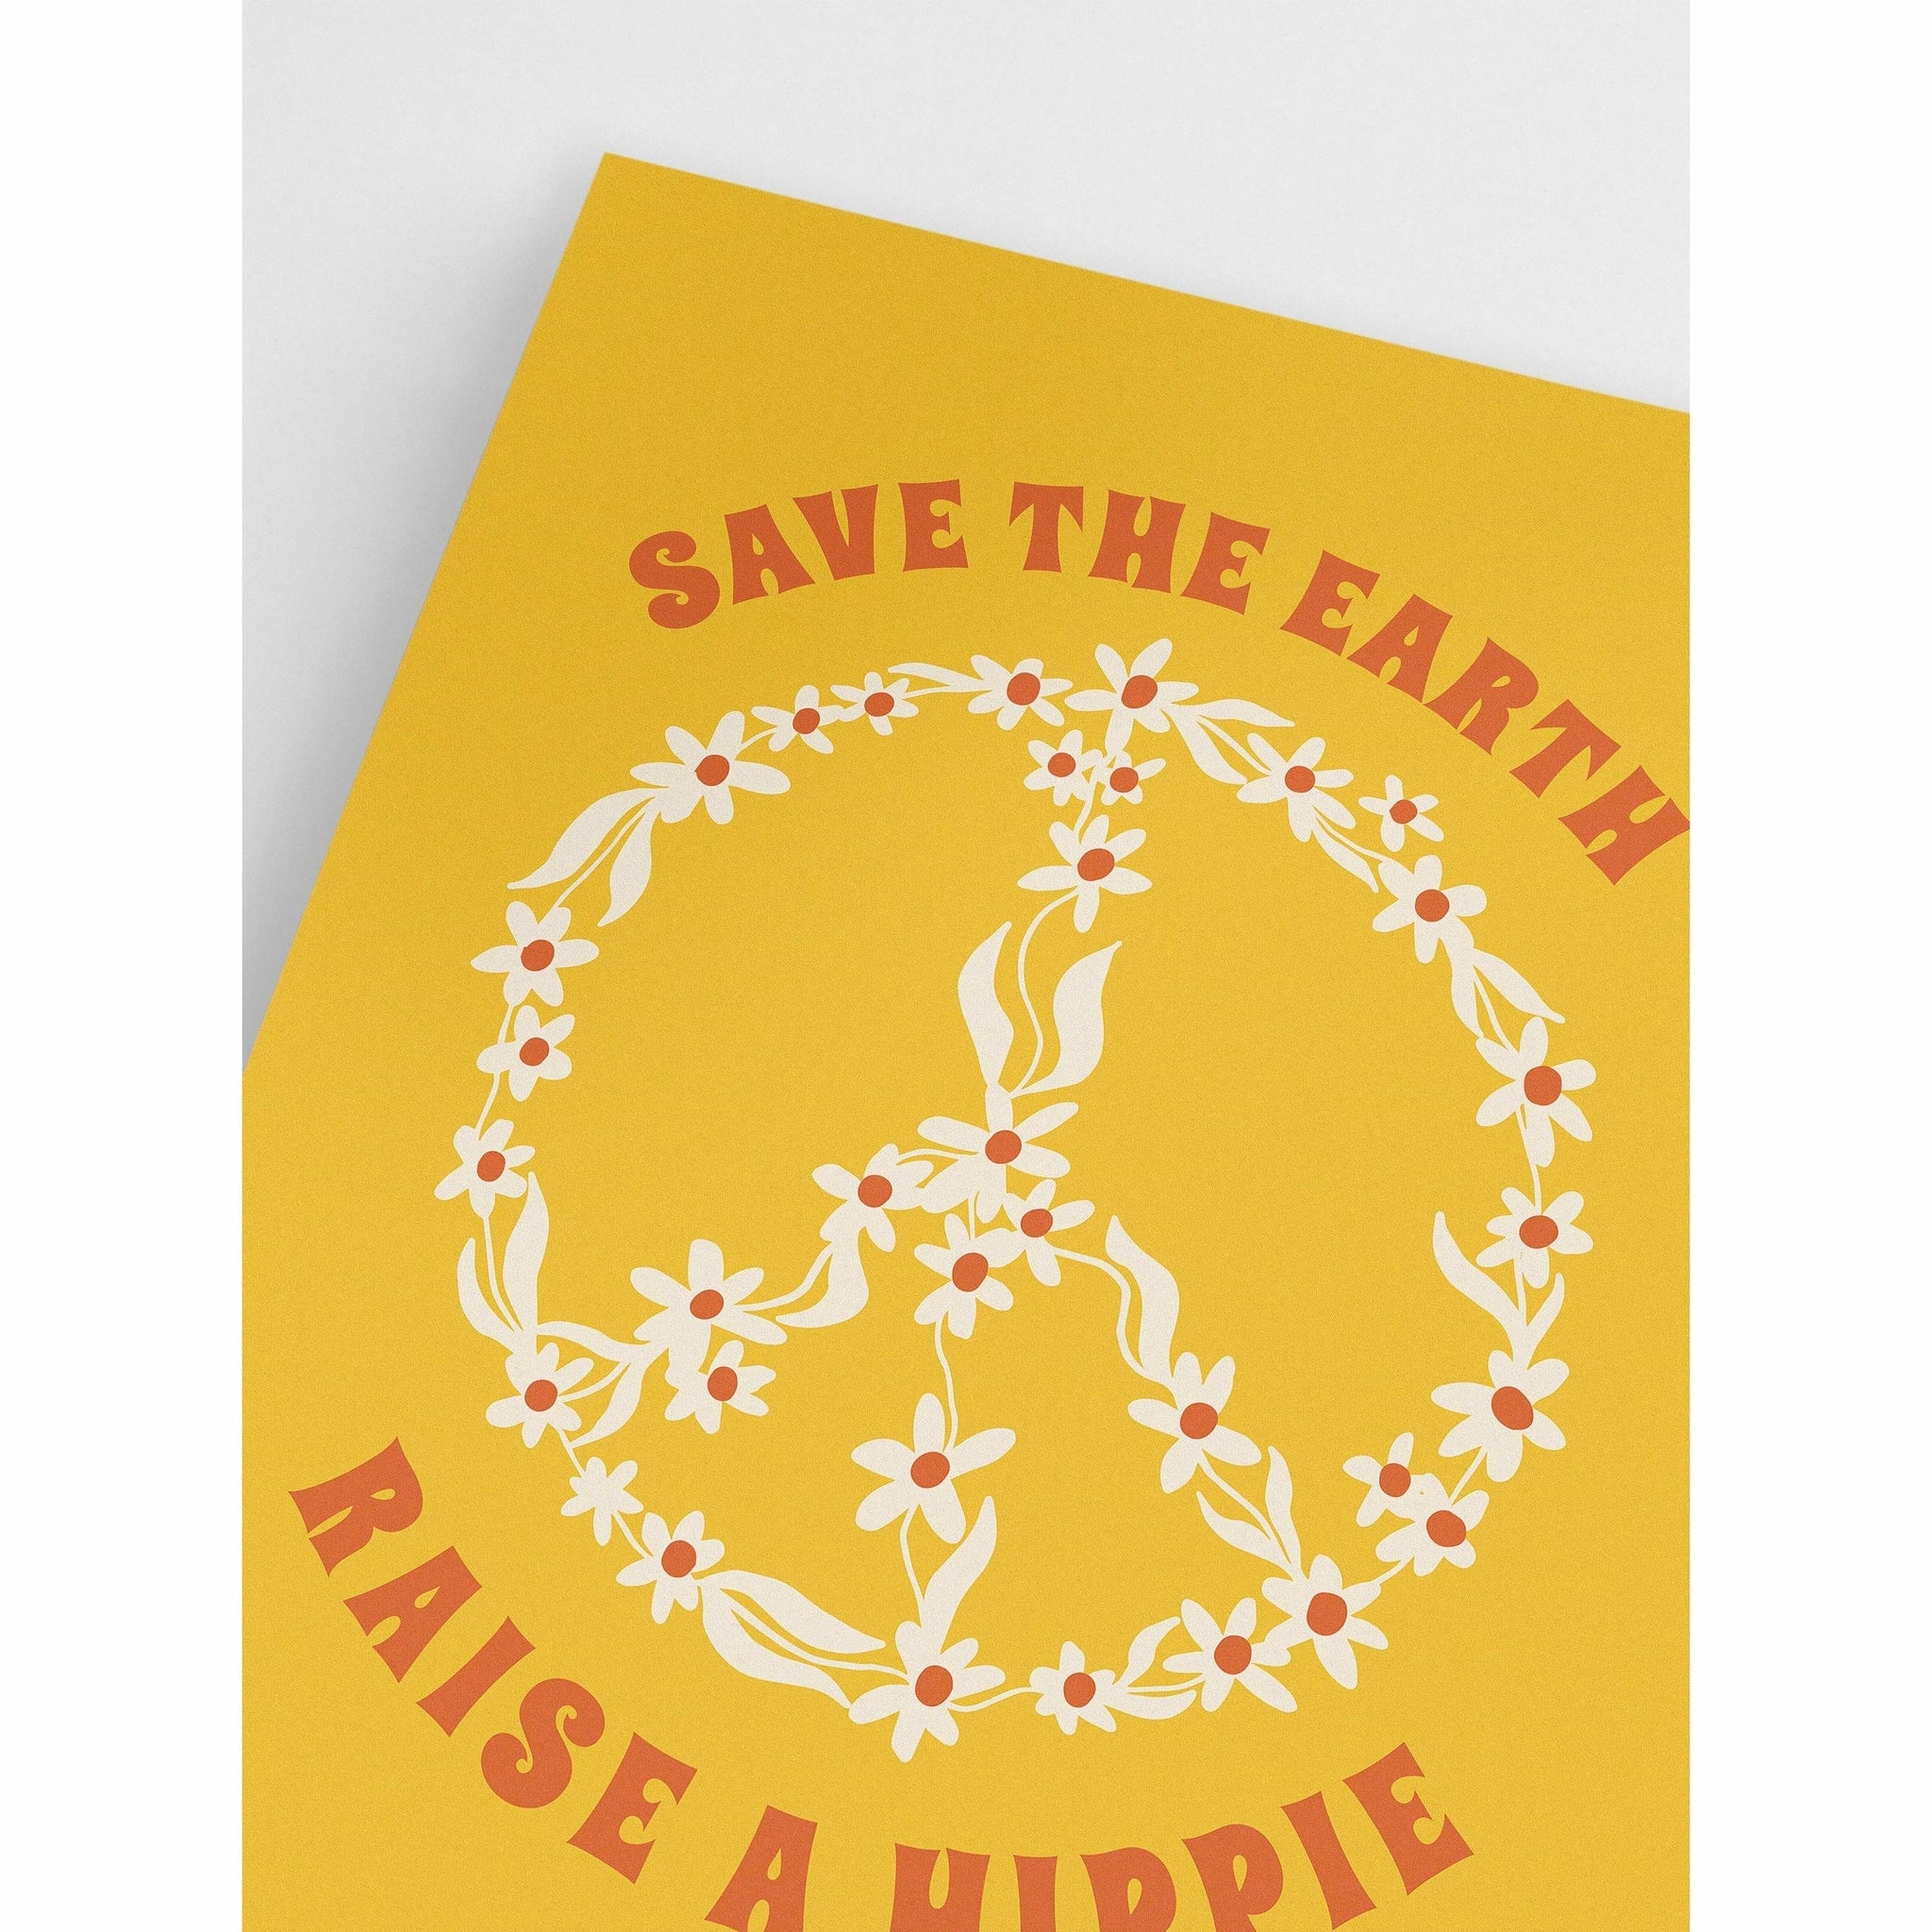 Save the Earth 1970's Posters